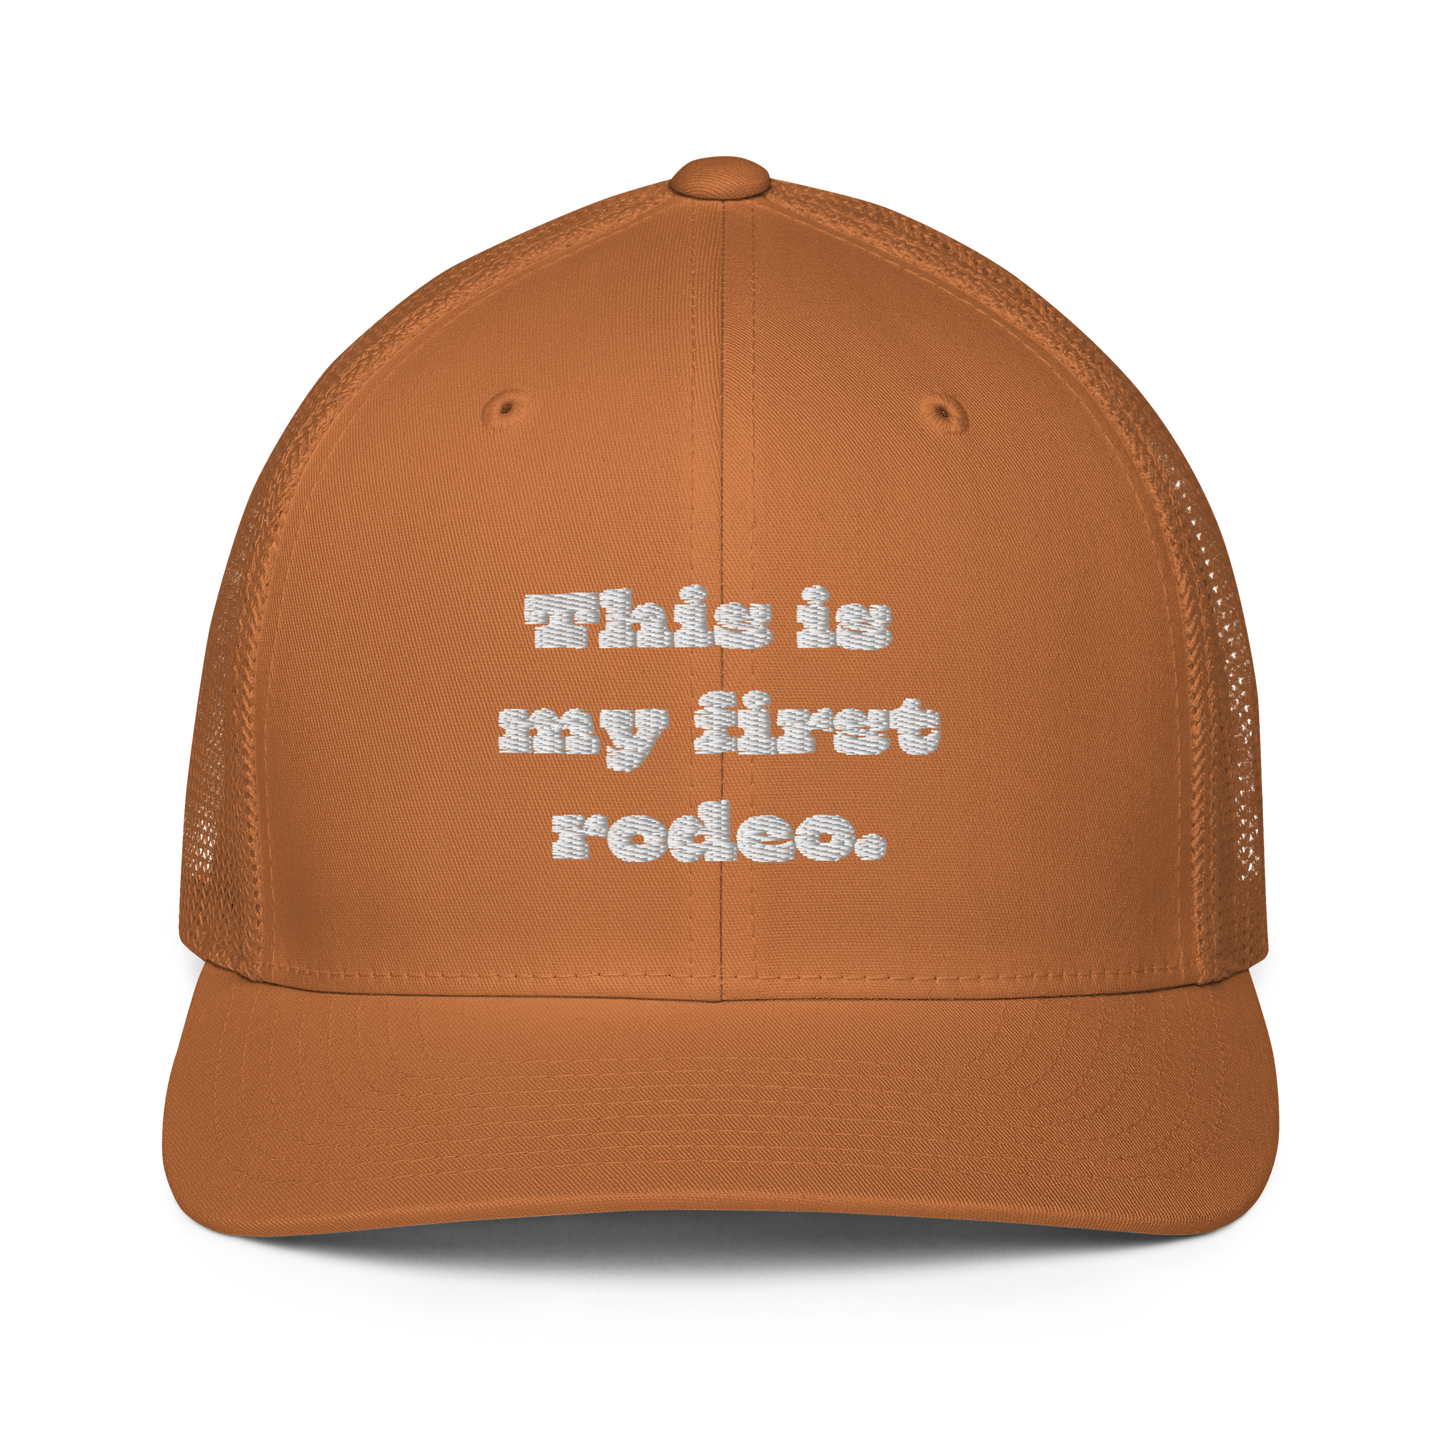 This is My First Rodeo Cap